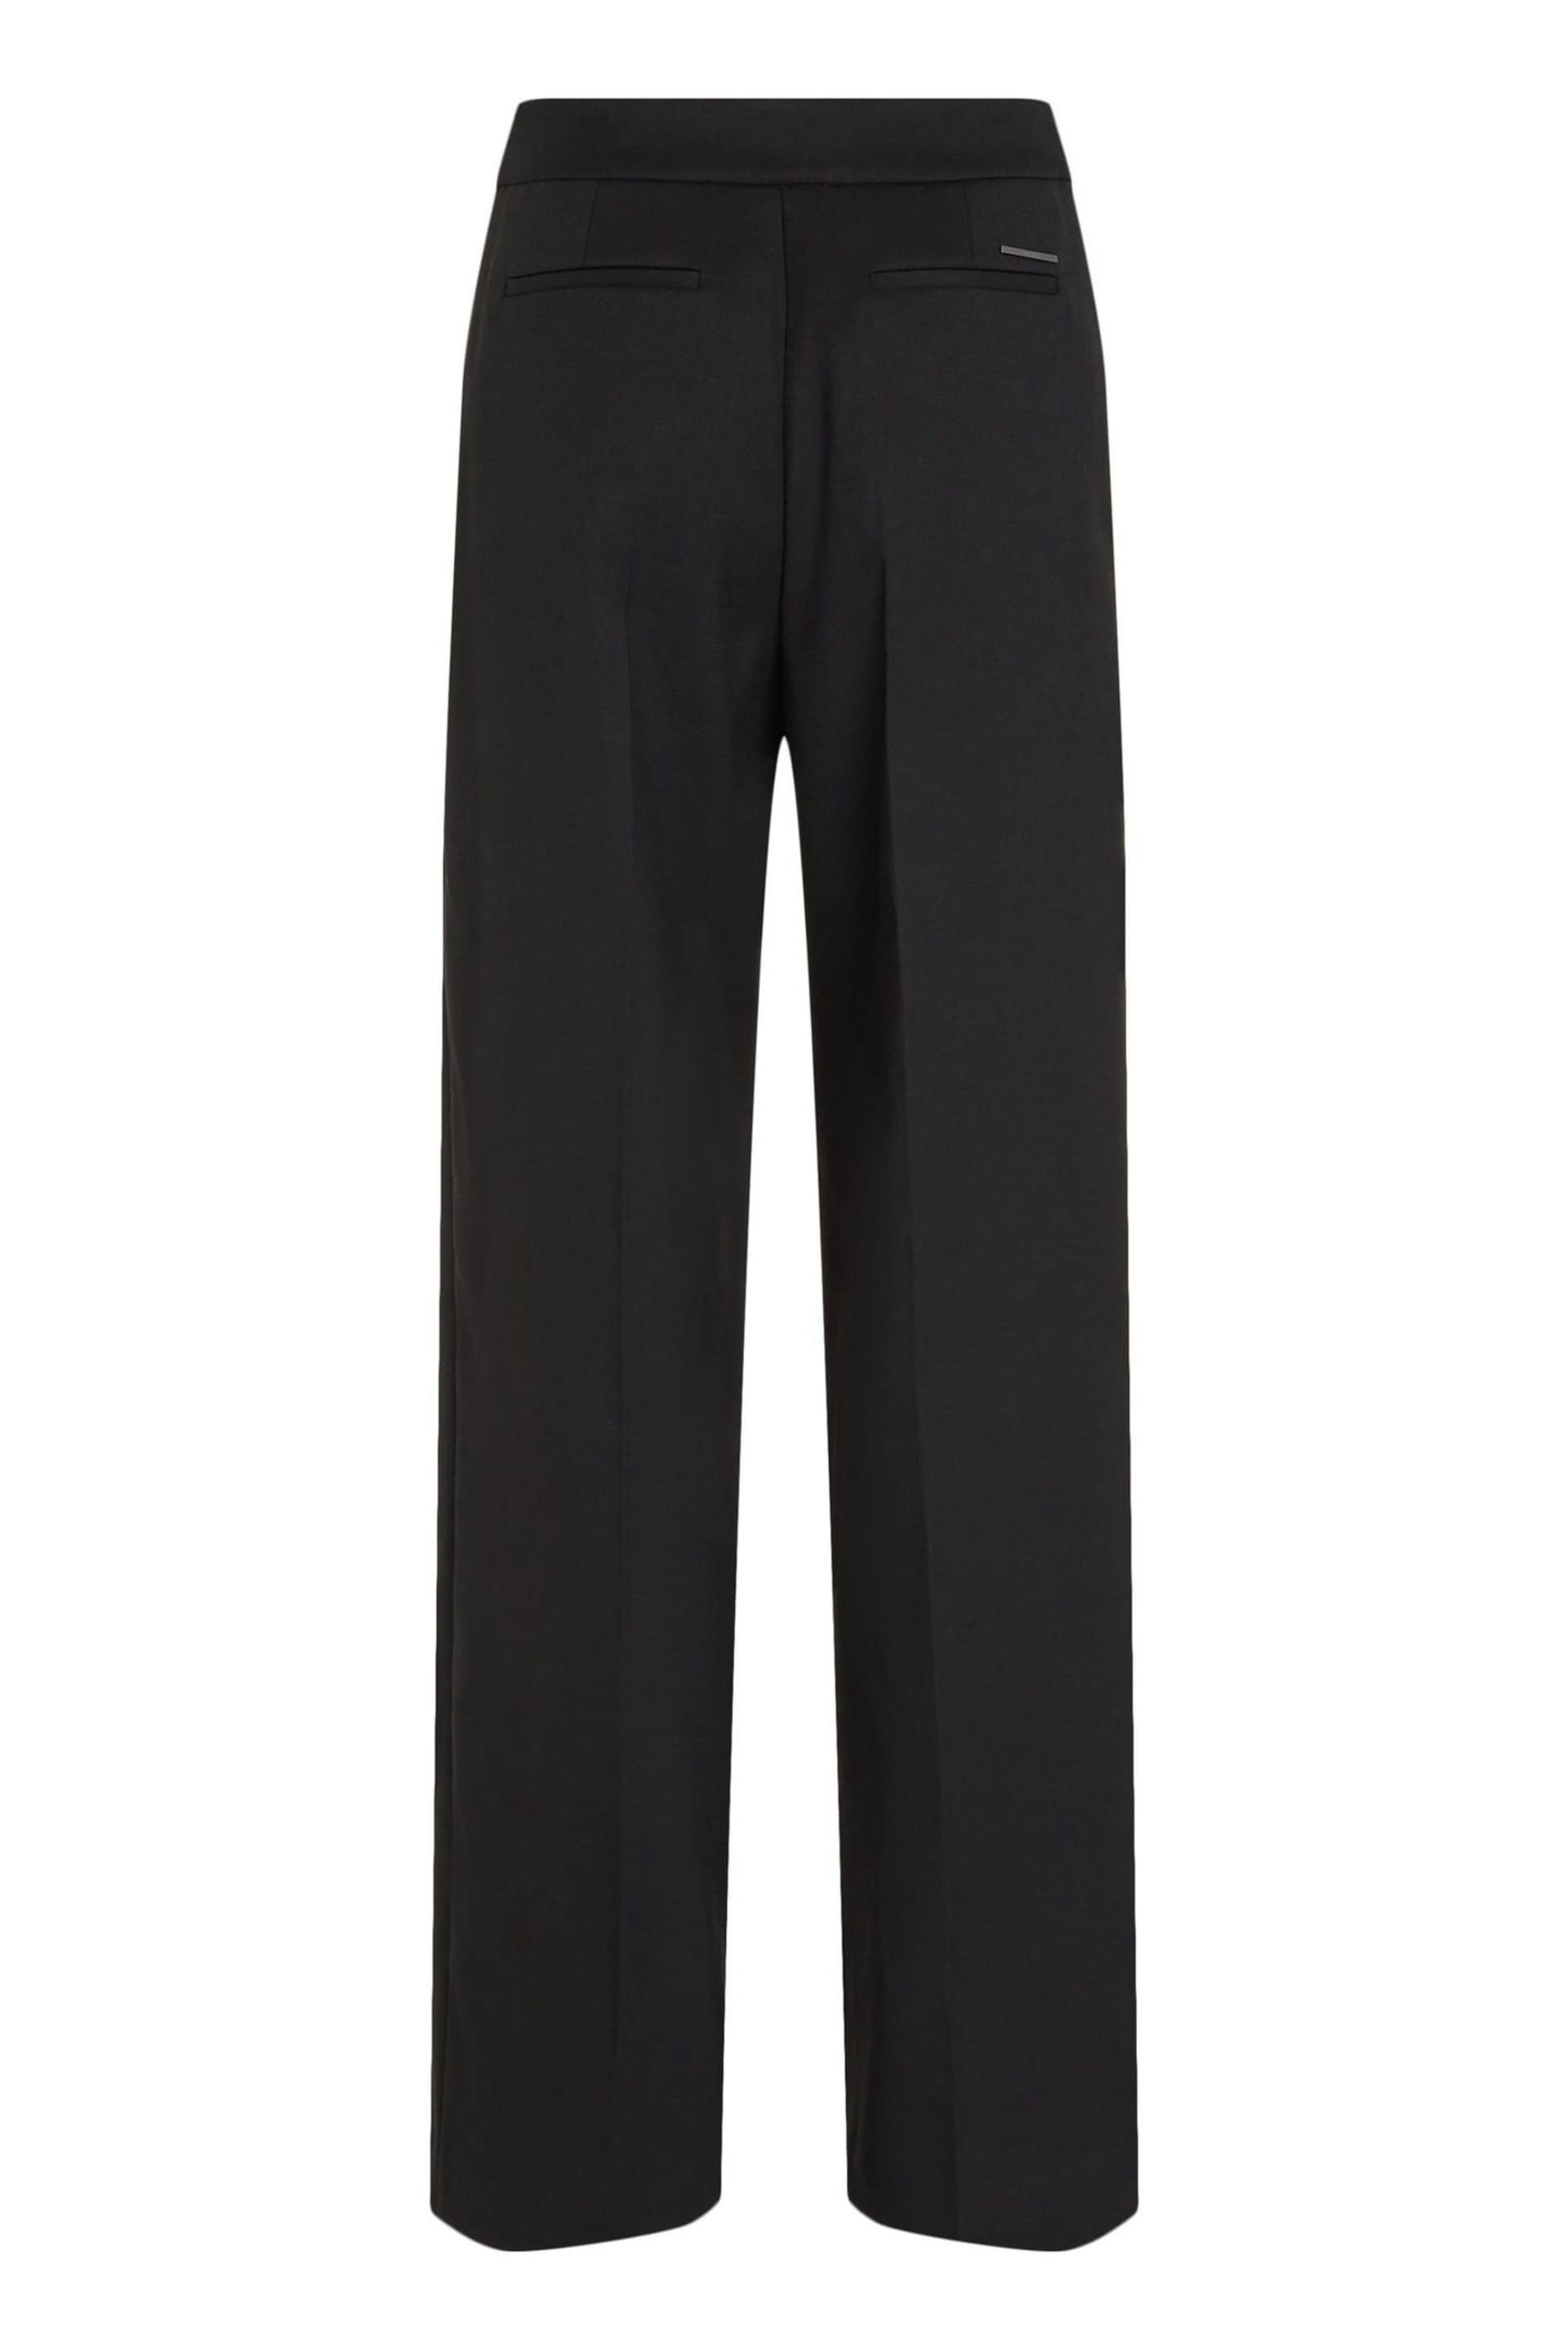 Calvin Klein Black Tailored Wide Leg Trousers - Image 5 of 6